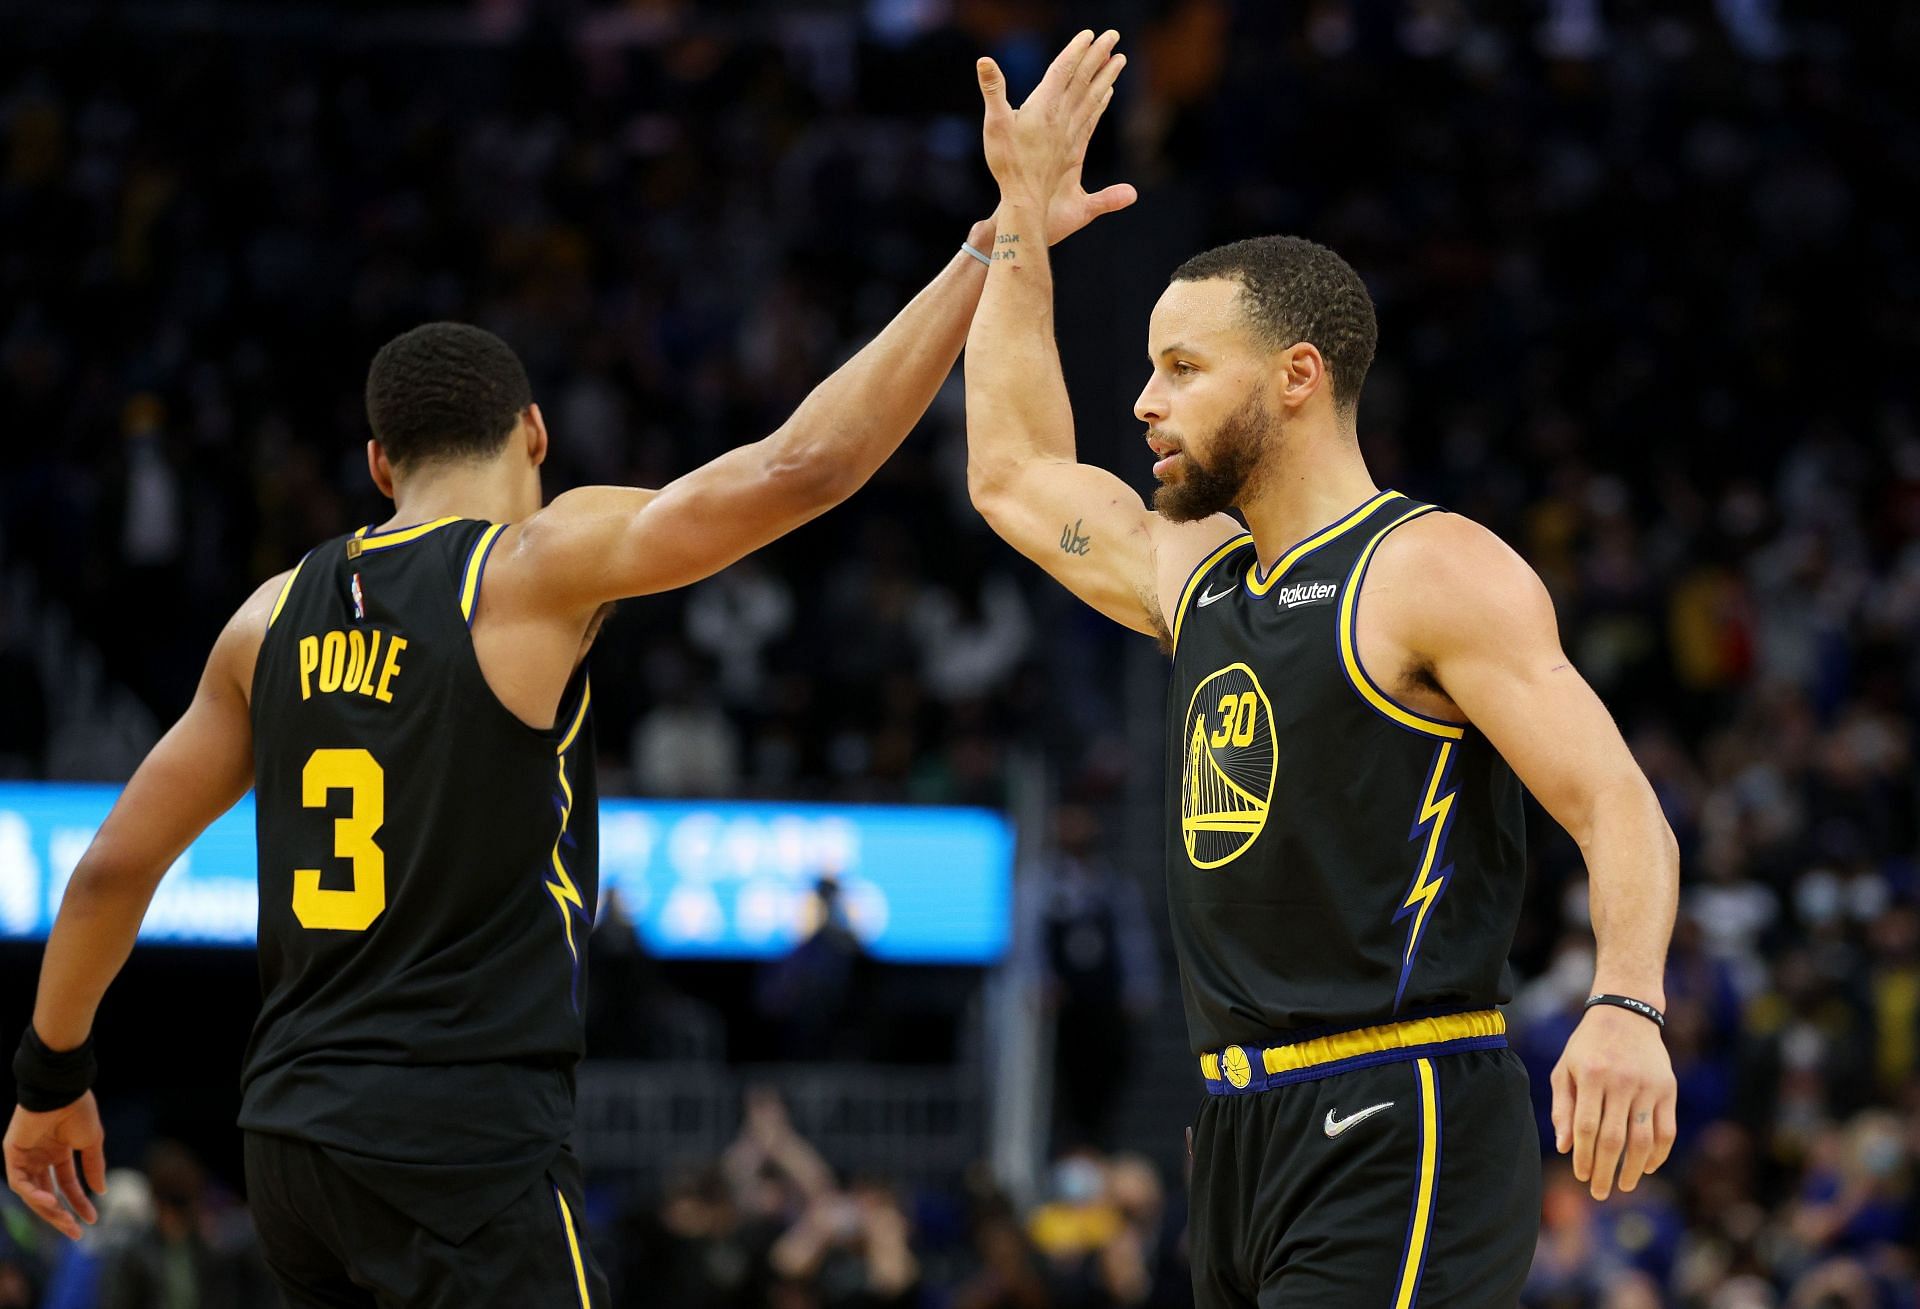 Jordan Poole and Stephen Curry of the Golden State Warriors